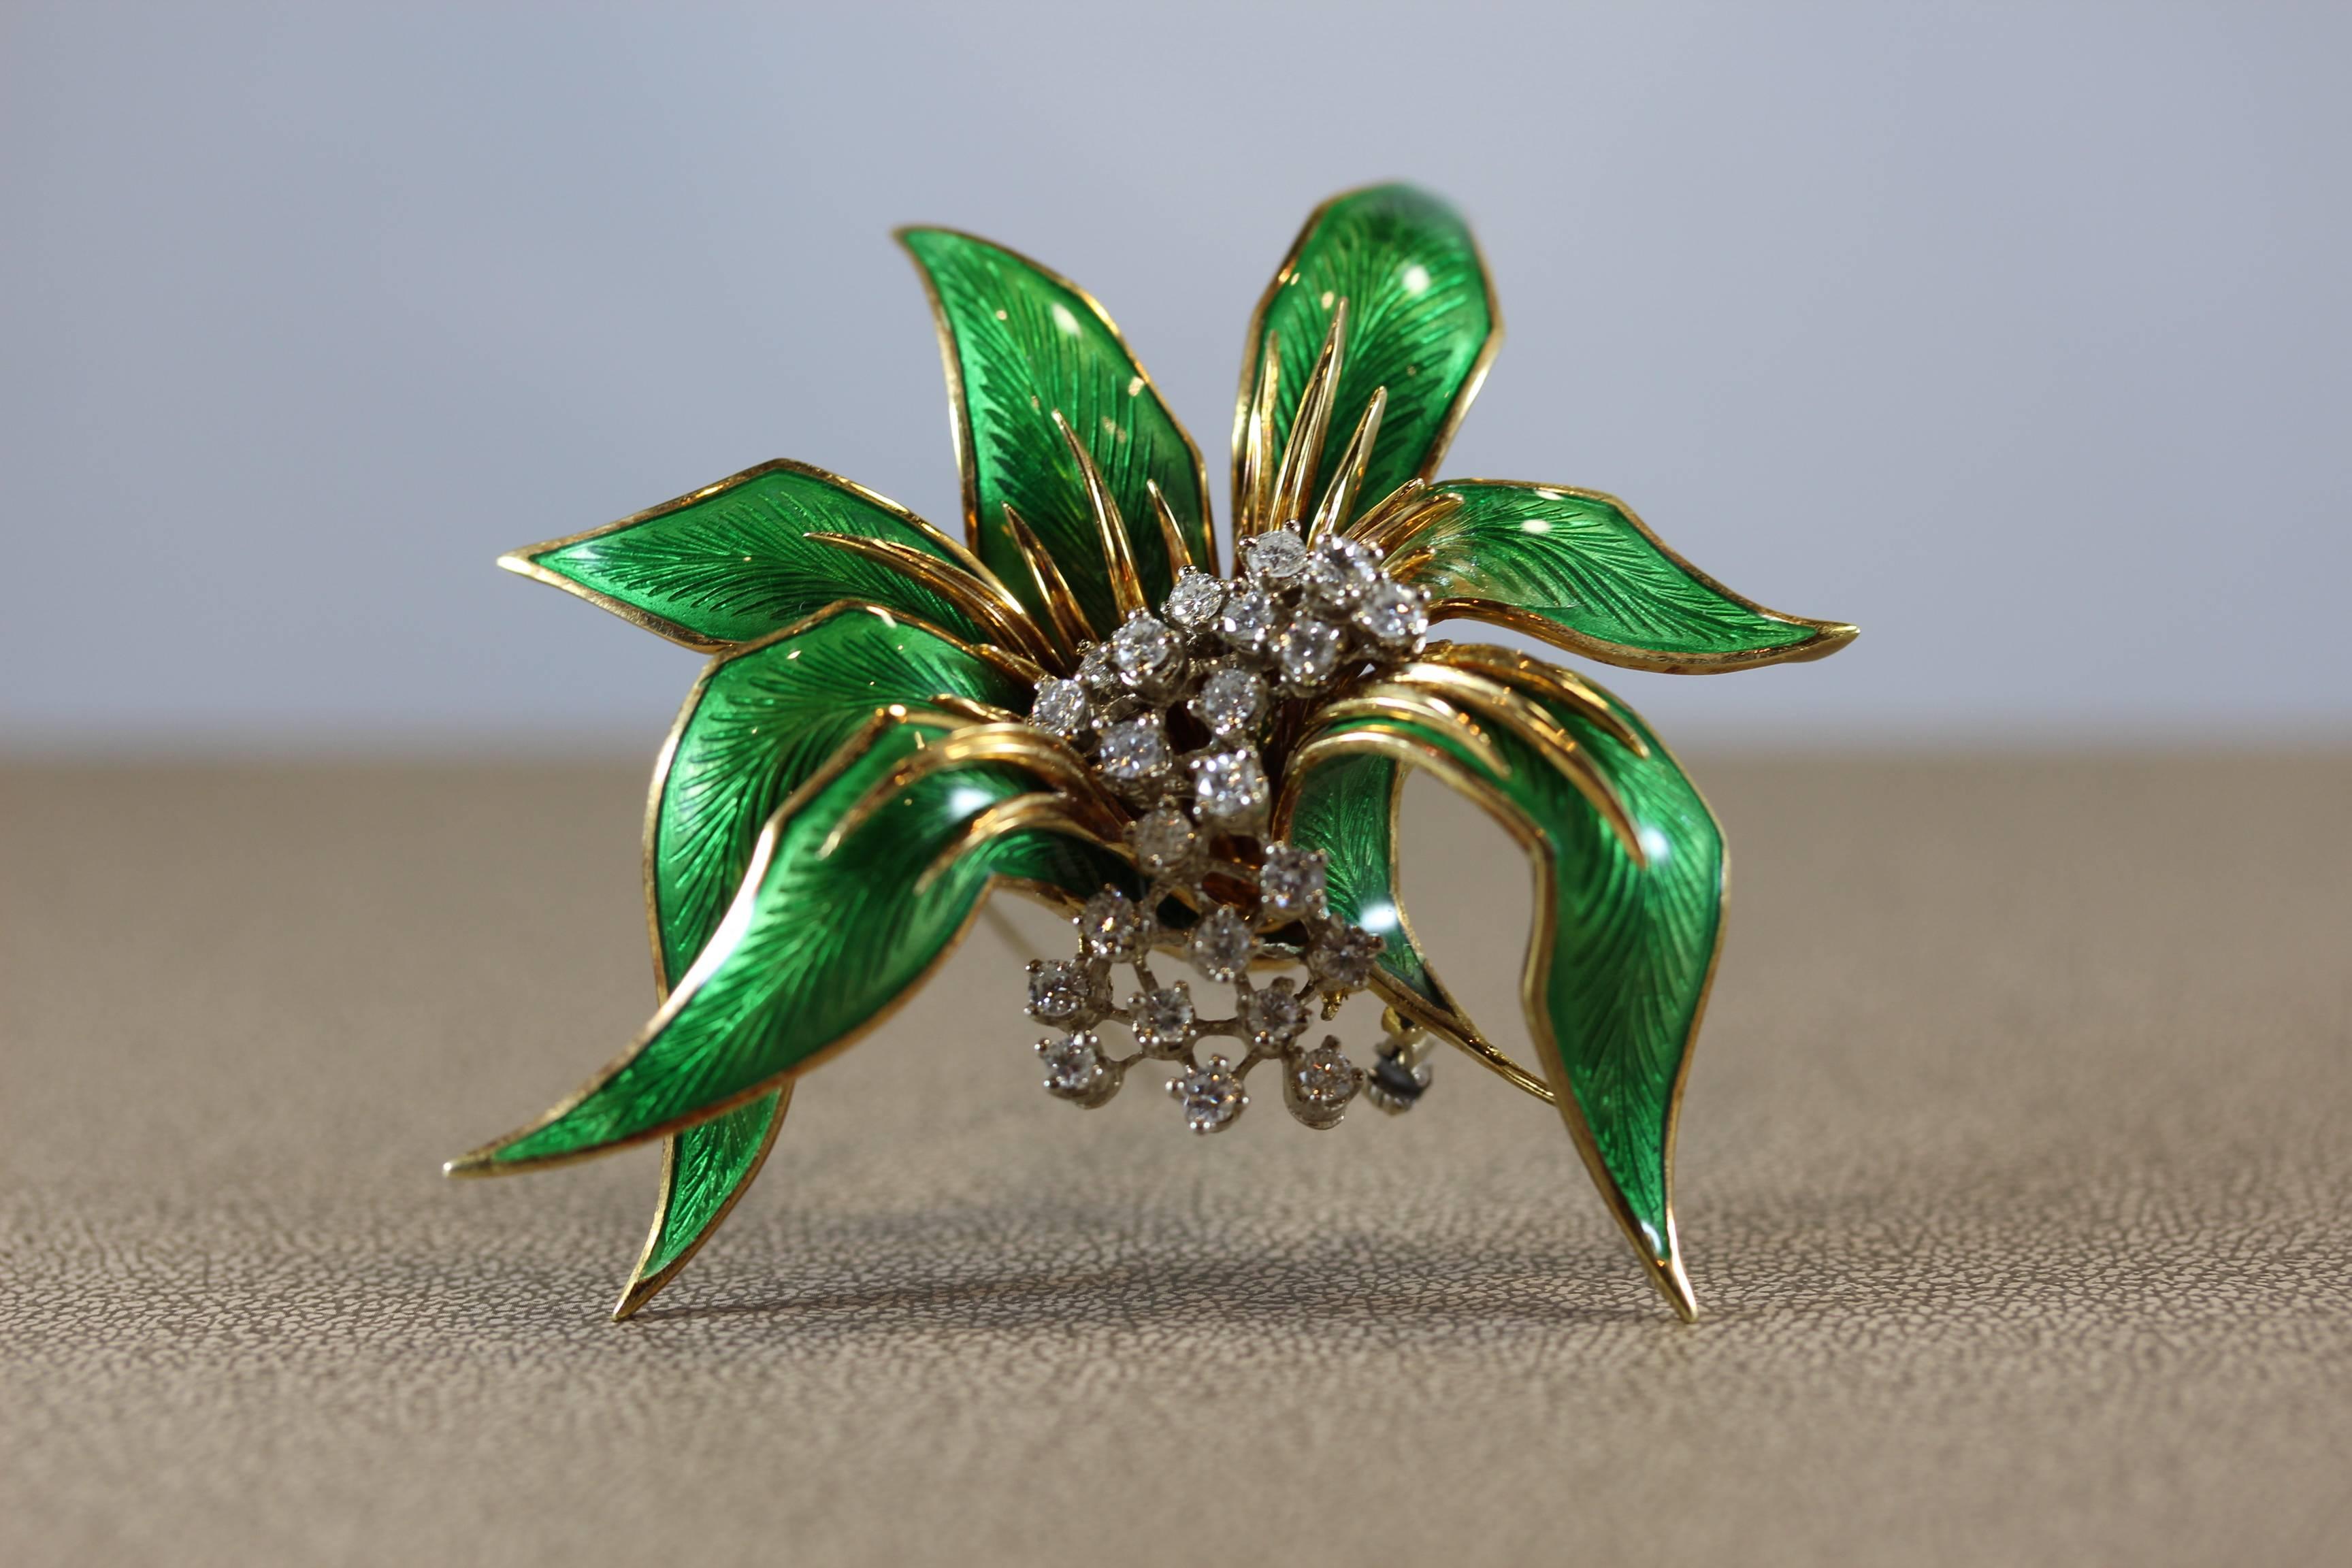 A beautifully made Italian brooch featuring approximately 1.50 carats of full-cut diamonds set in 18k yellow gold. The leaves are covered in green guilloche enamel. 

2.50 x 2.45 inch 